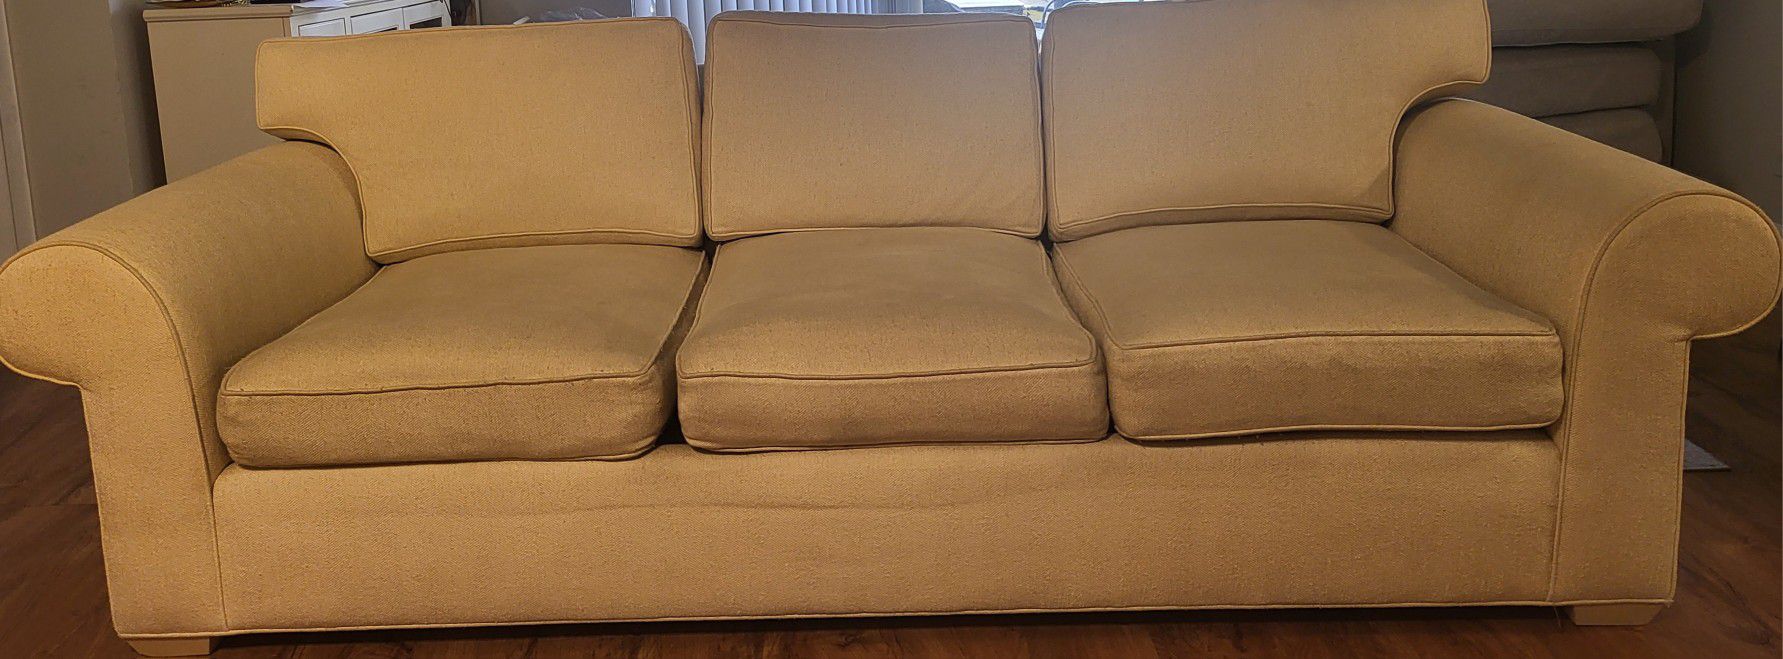 Couch, light yellow  8'L  x  2' 10"H x 3' 4" D